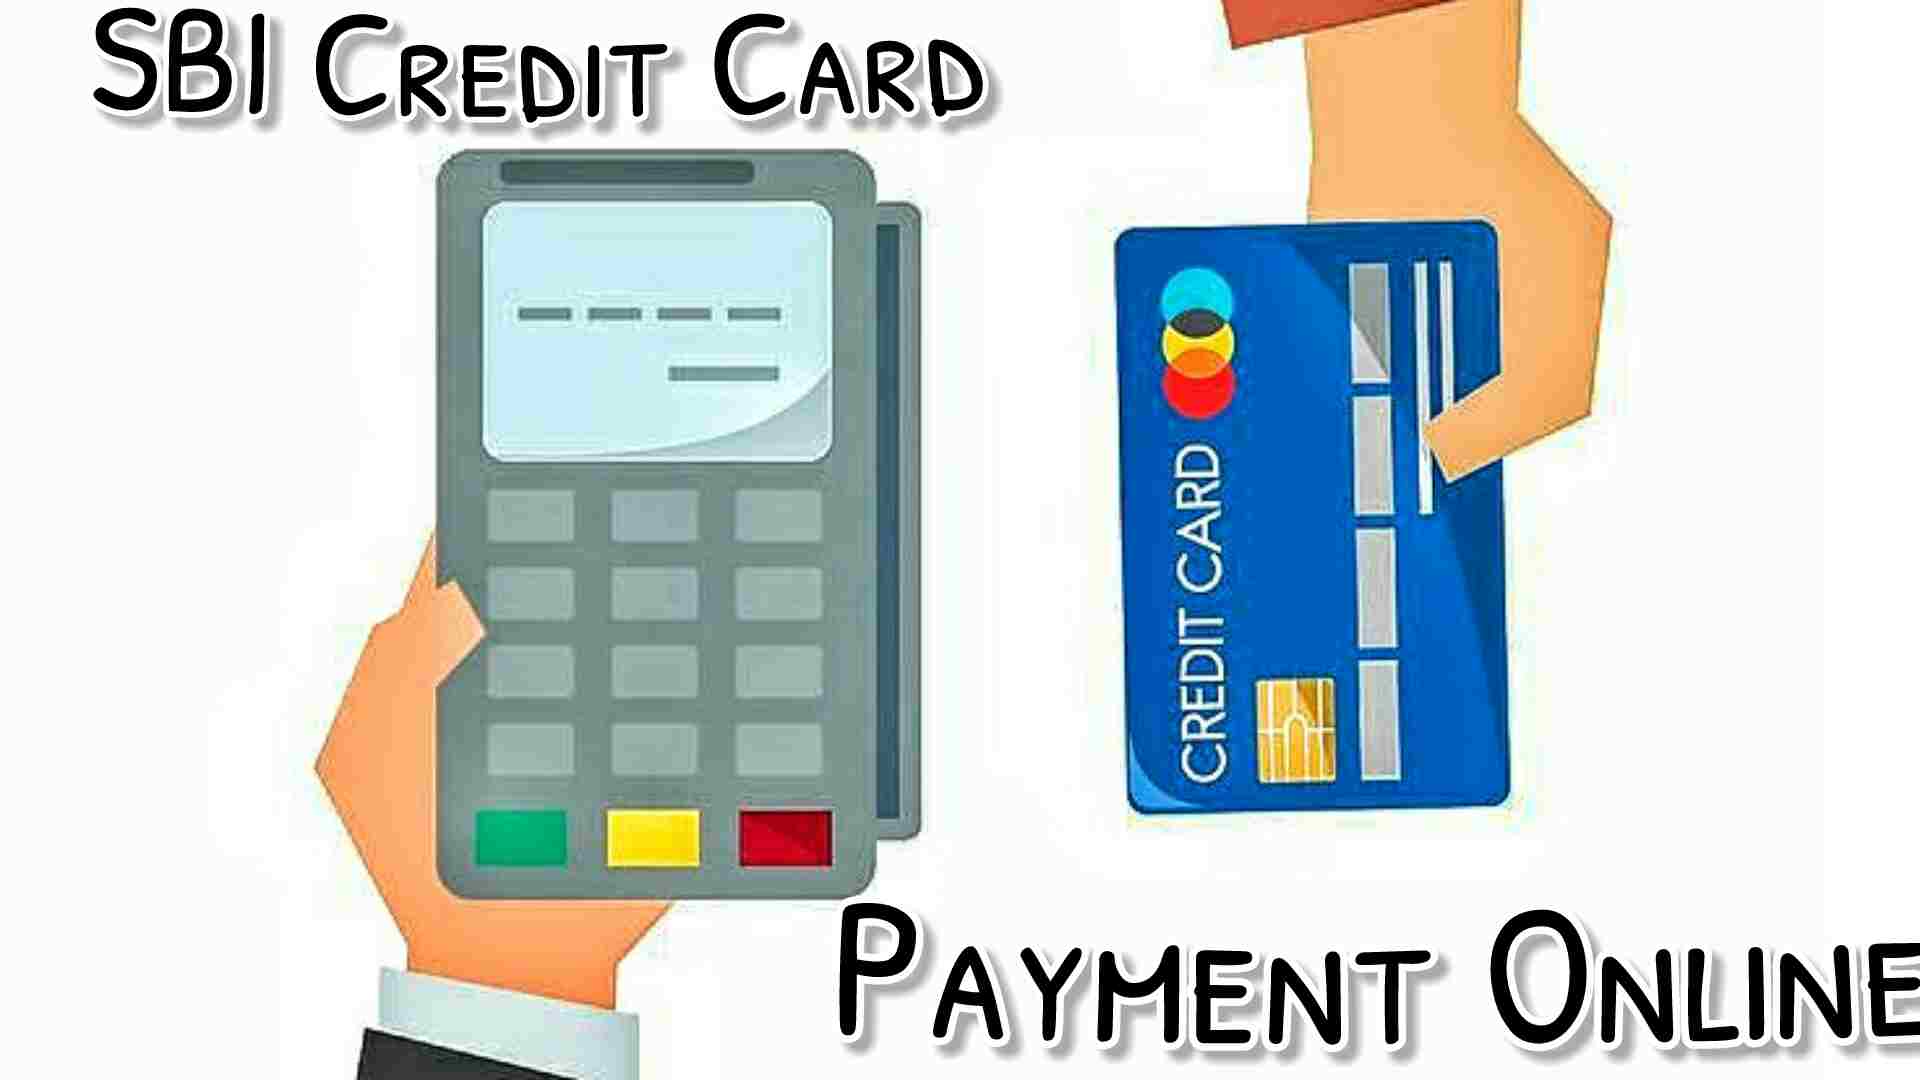 14 Ways To Make Sbi Credit Card Payment Online And Offline